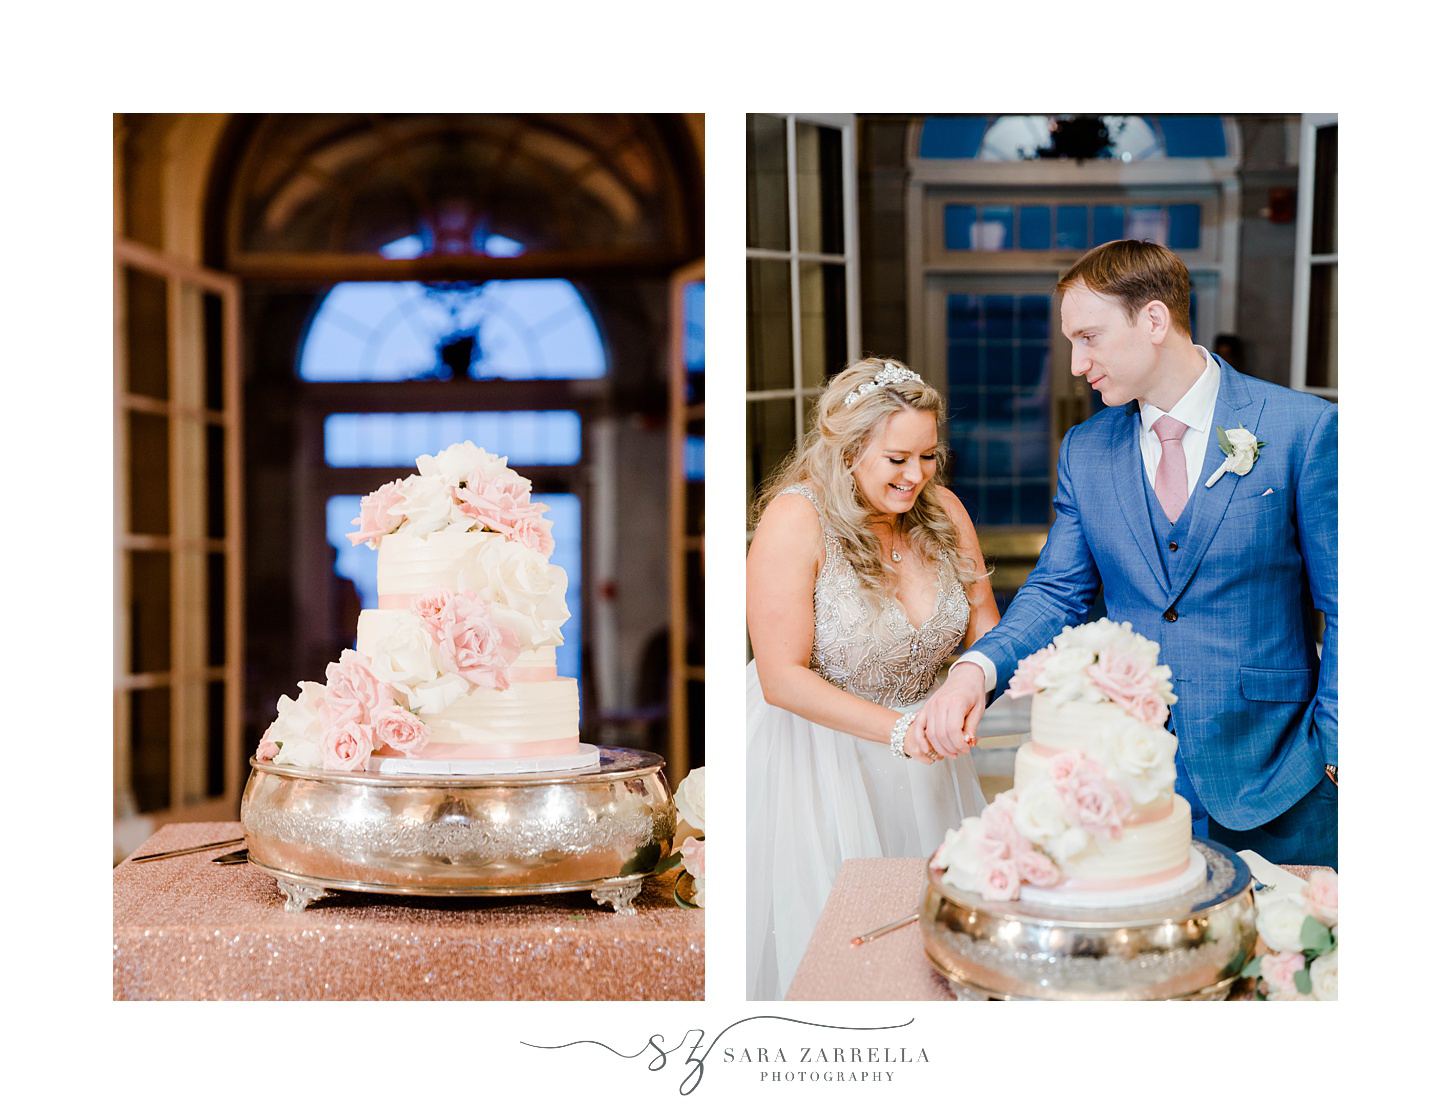 newlyweds cut wedding cake with pink and ivory flowers 